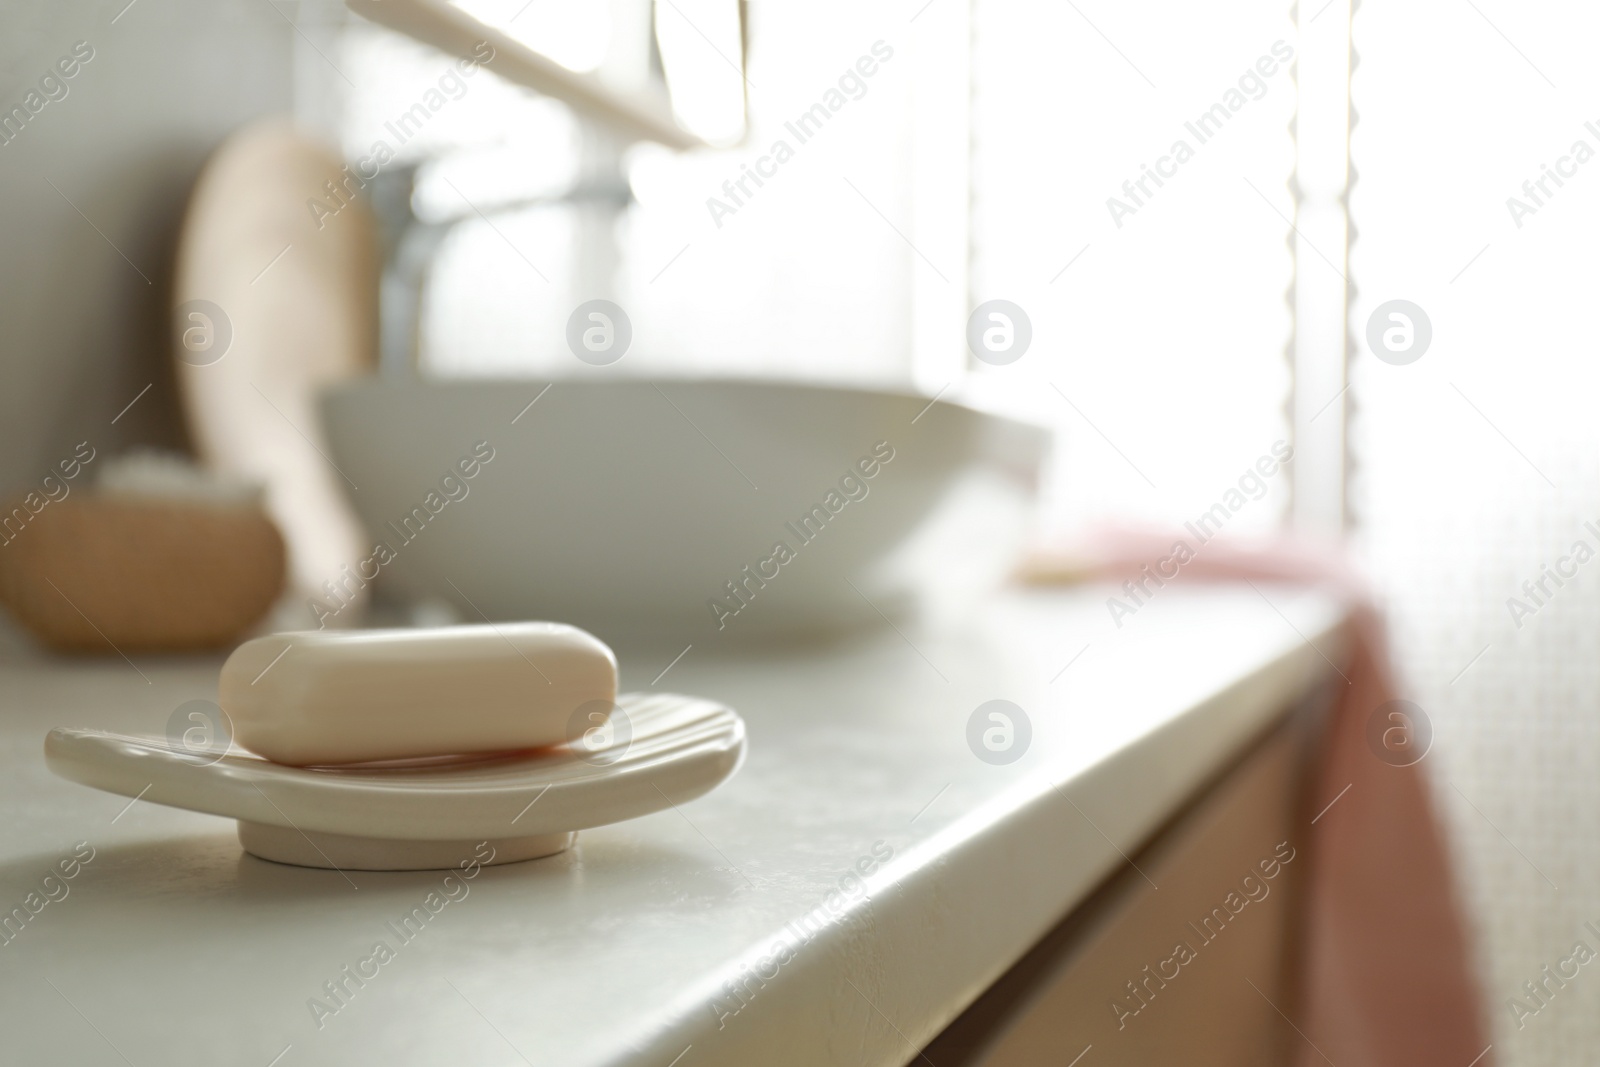 Photo of Bar of soap on countertop in modern bathroom interior